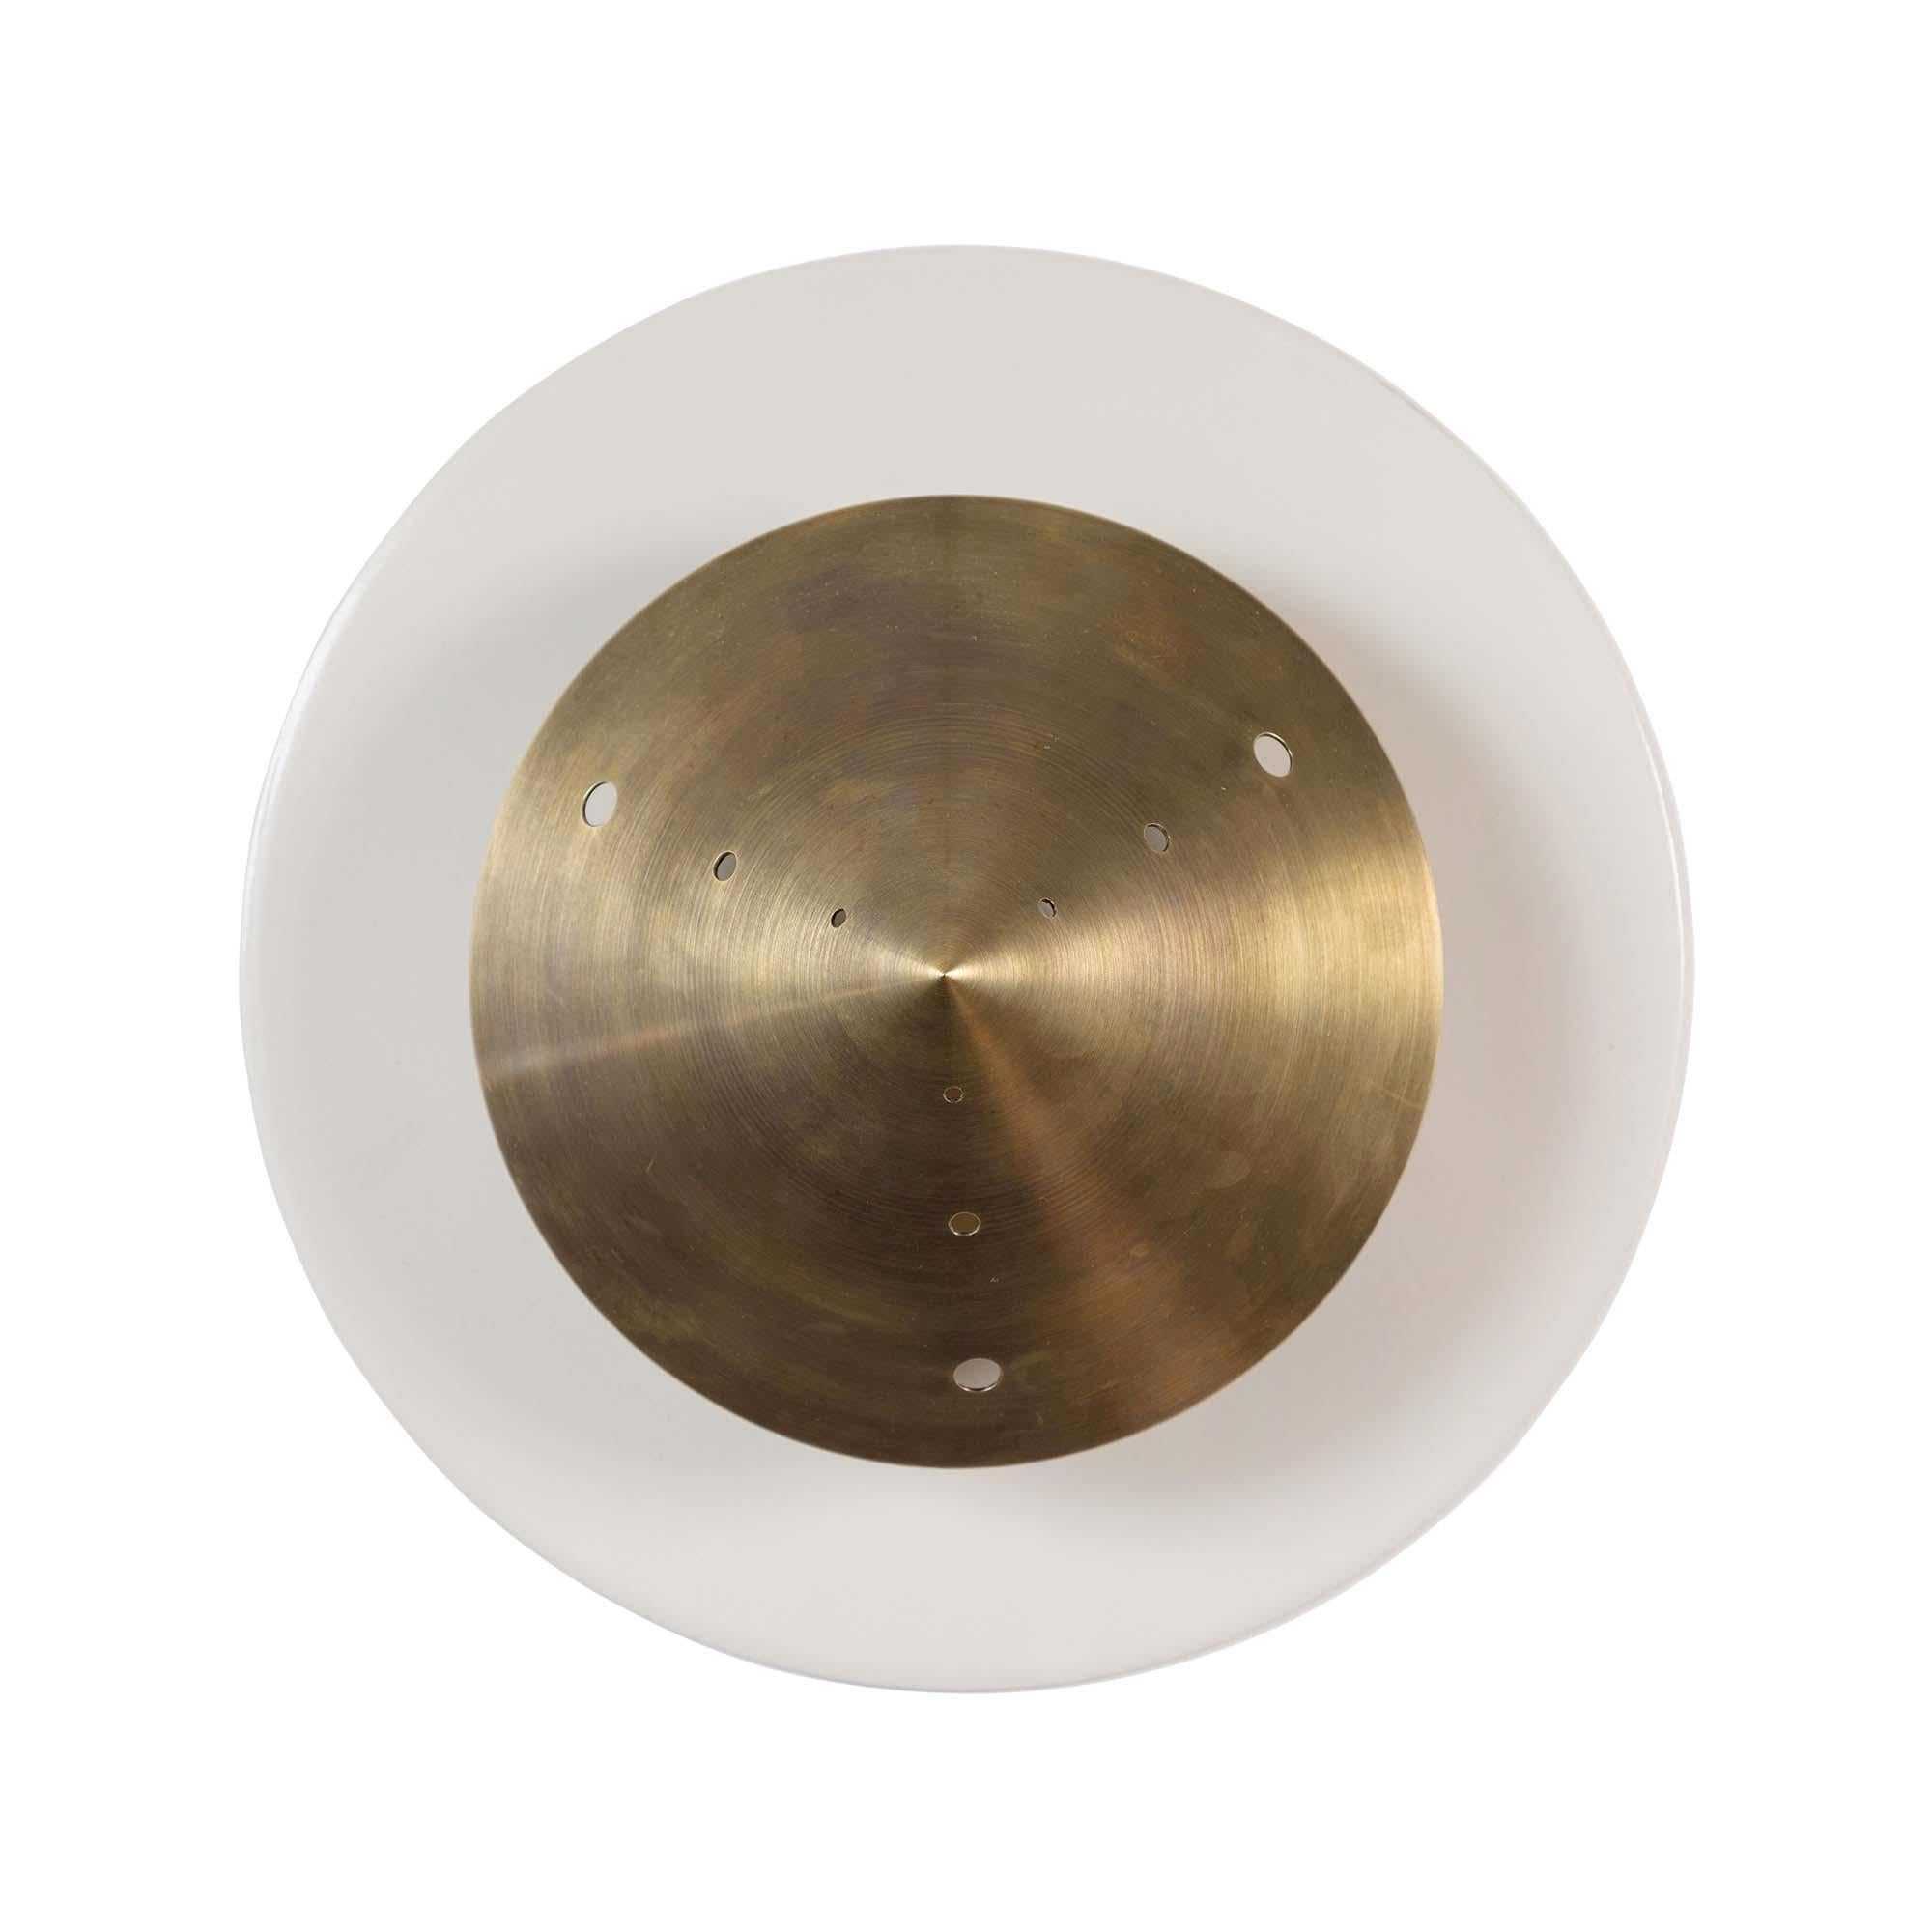 The Pruckel sconce features a circular backplate with a conical perforated brass Shade.

The Lawson-Fenning Collection is designed and handmade in Los Angeles, California.